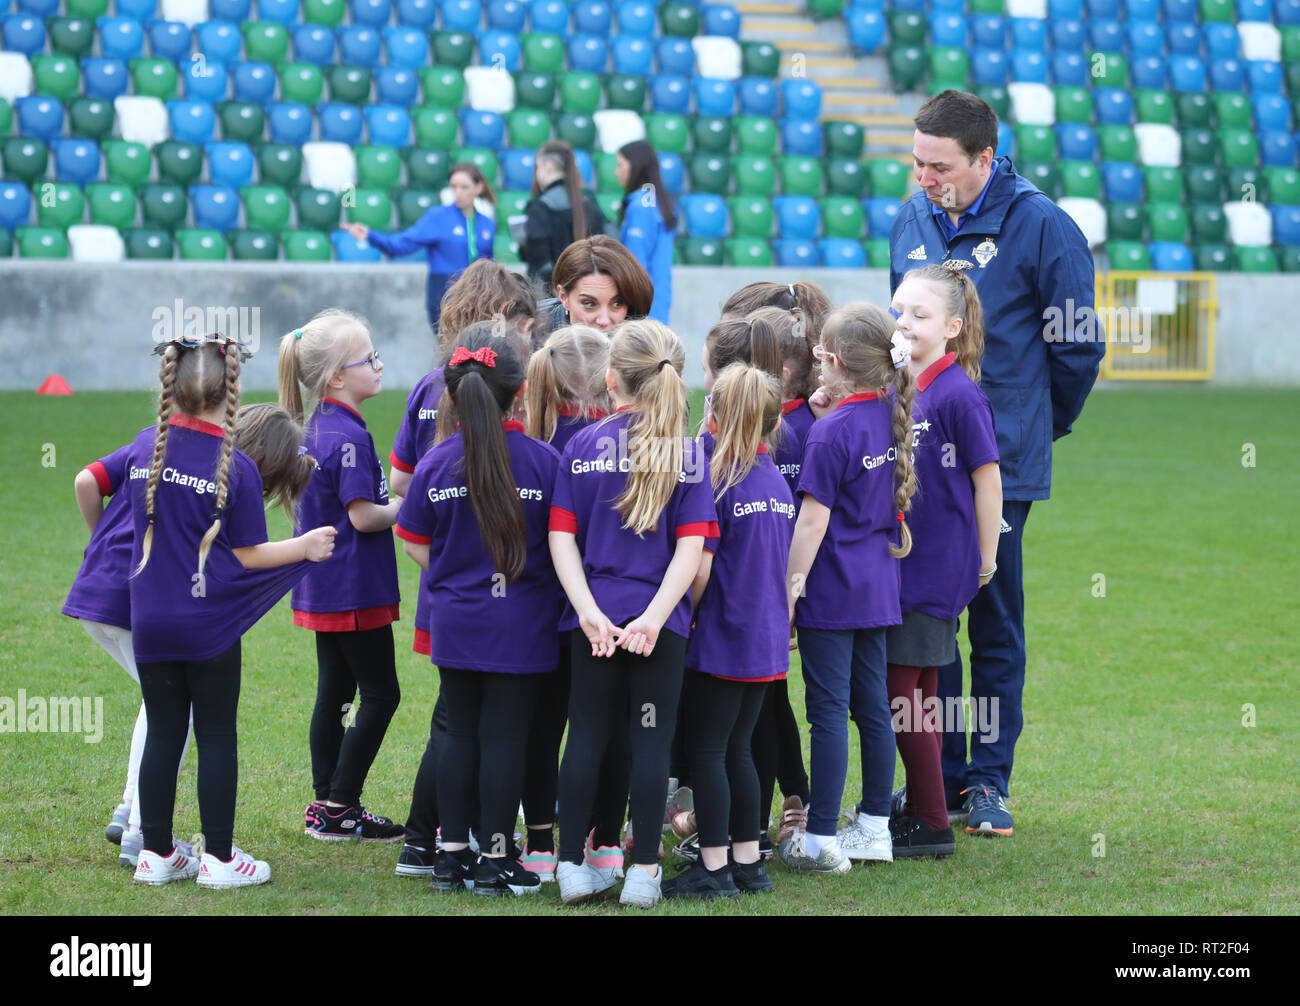 The Duchess of Cambridge takes part in a coaching session during hers and the Duke of Cambridge's visit to Windsor Park, Belfast as part of their two day visit to Northern Ireland. Stock Photo